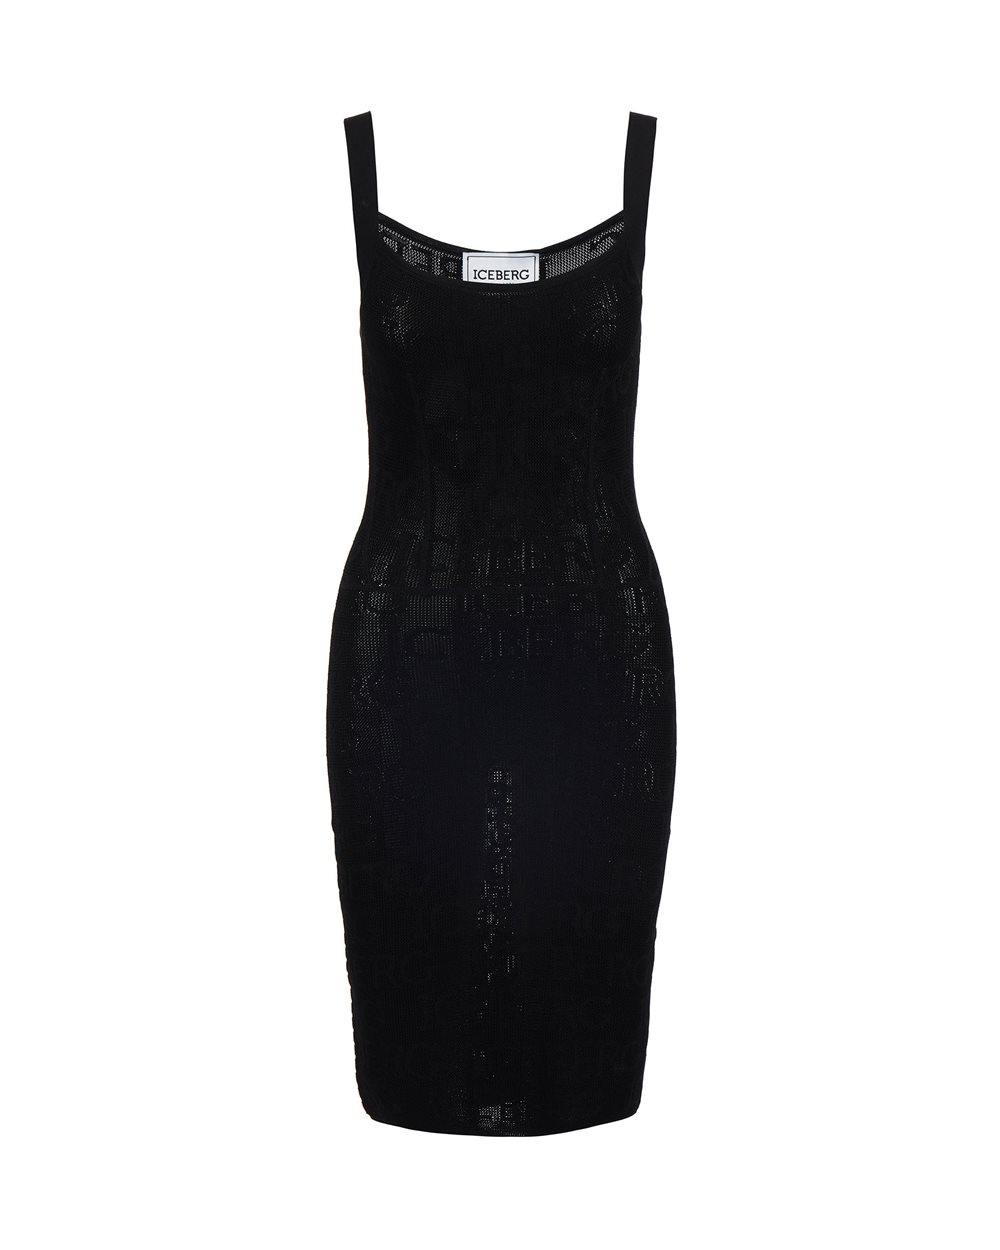 Sheath dress with logo - VALENTINE'S DAY GIFTS | Iceberg - Official Website